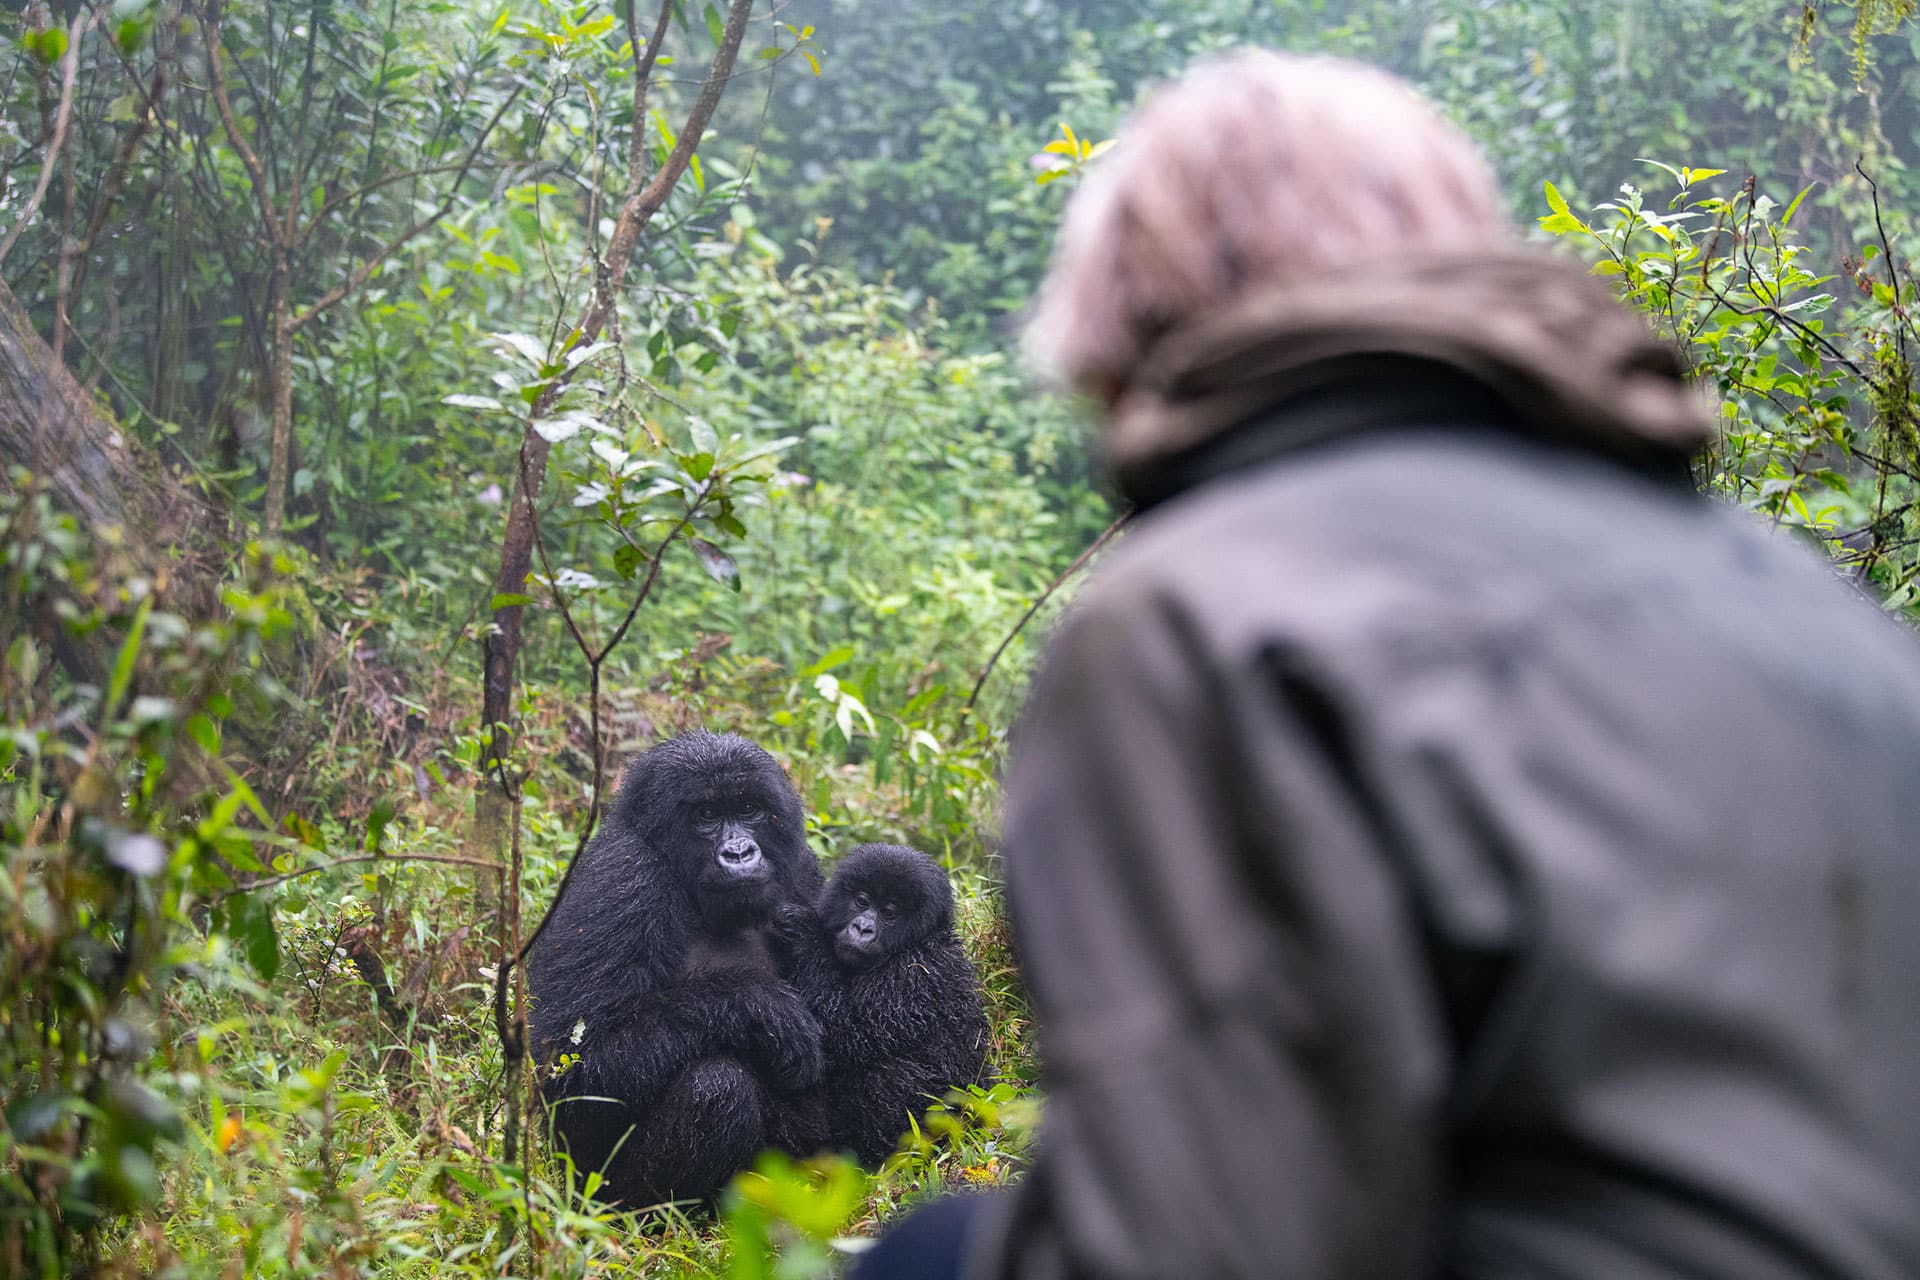 A person and two gorillas from the Sabyinyo gorilla family in Rwanda